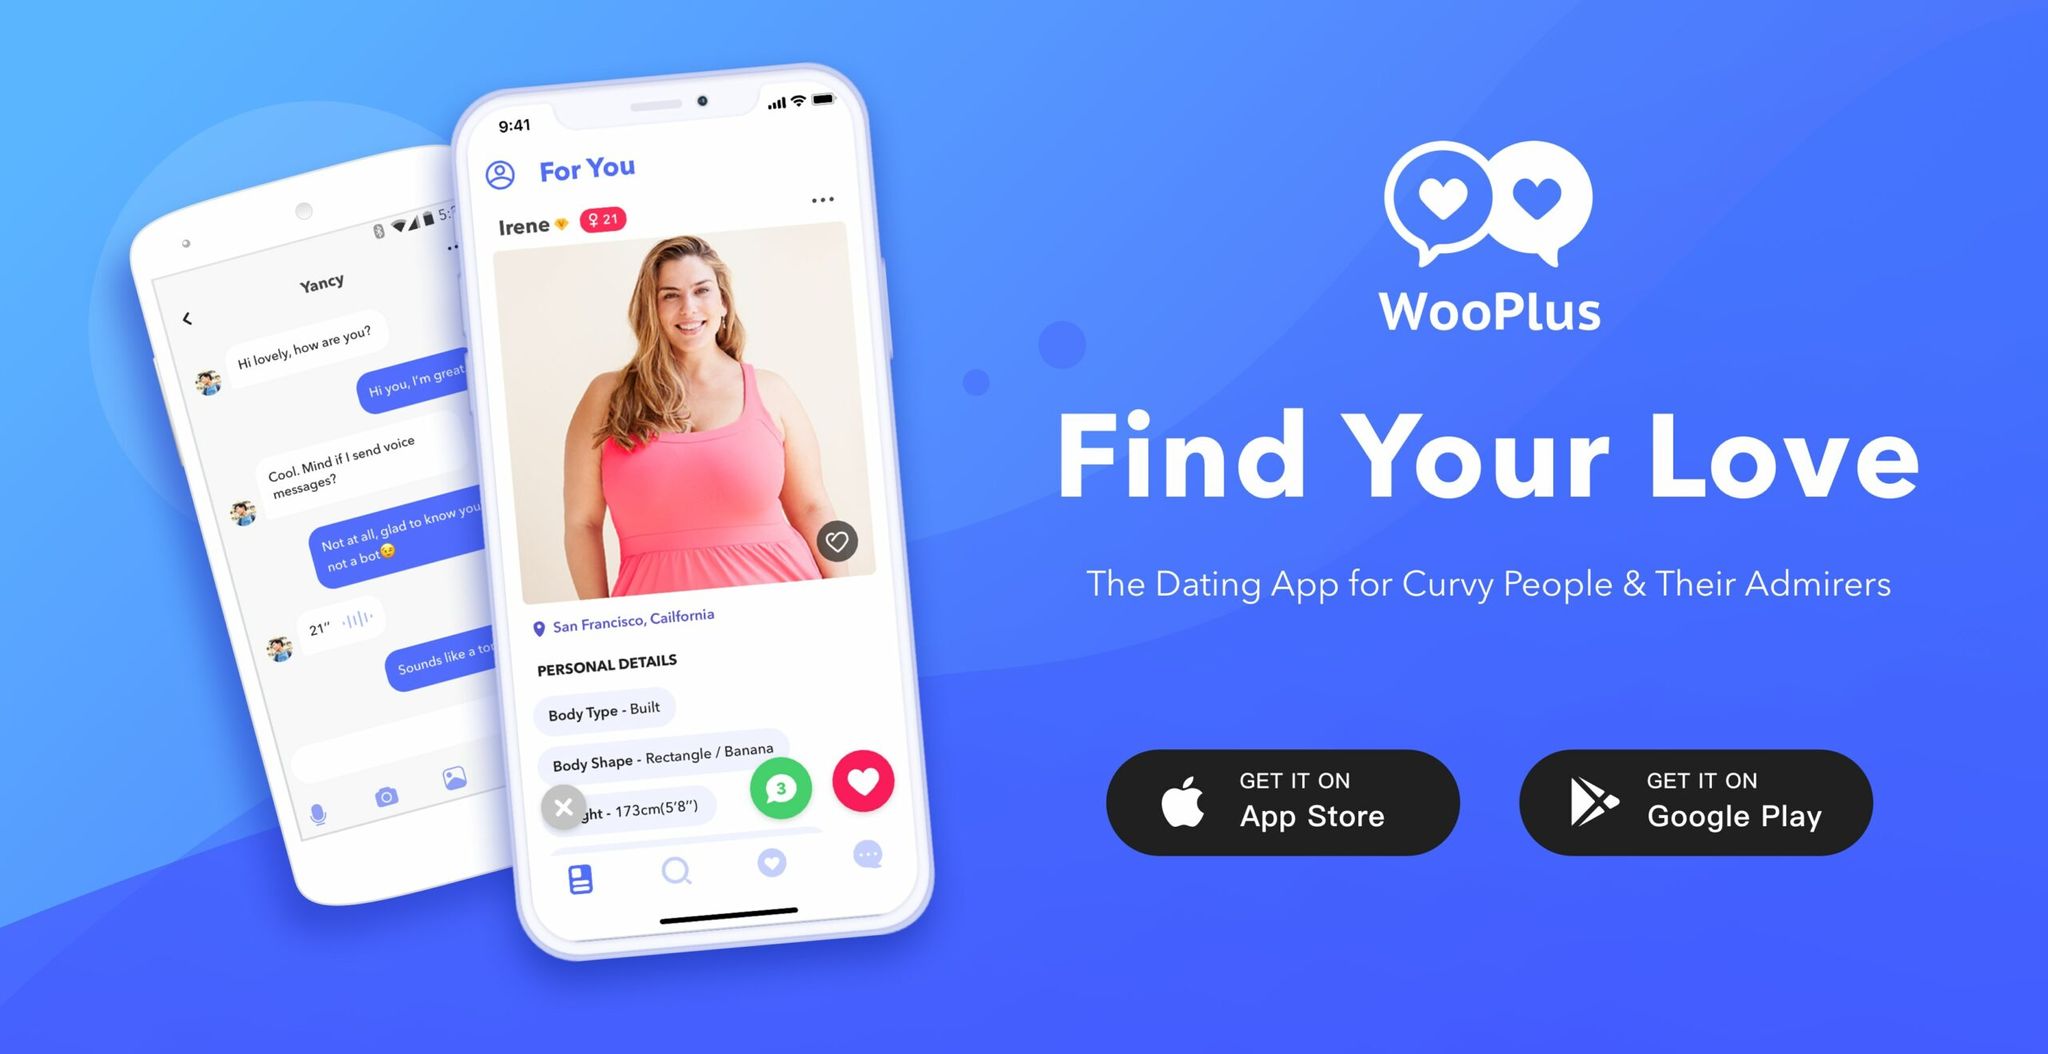 WooPlus Reviews: How Do Curvy People Think about WooPlus?